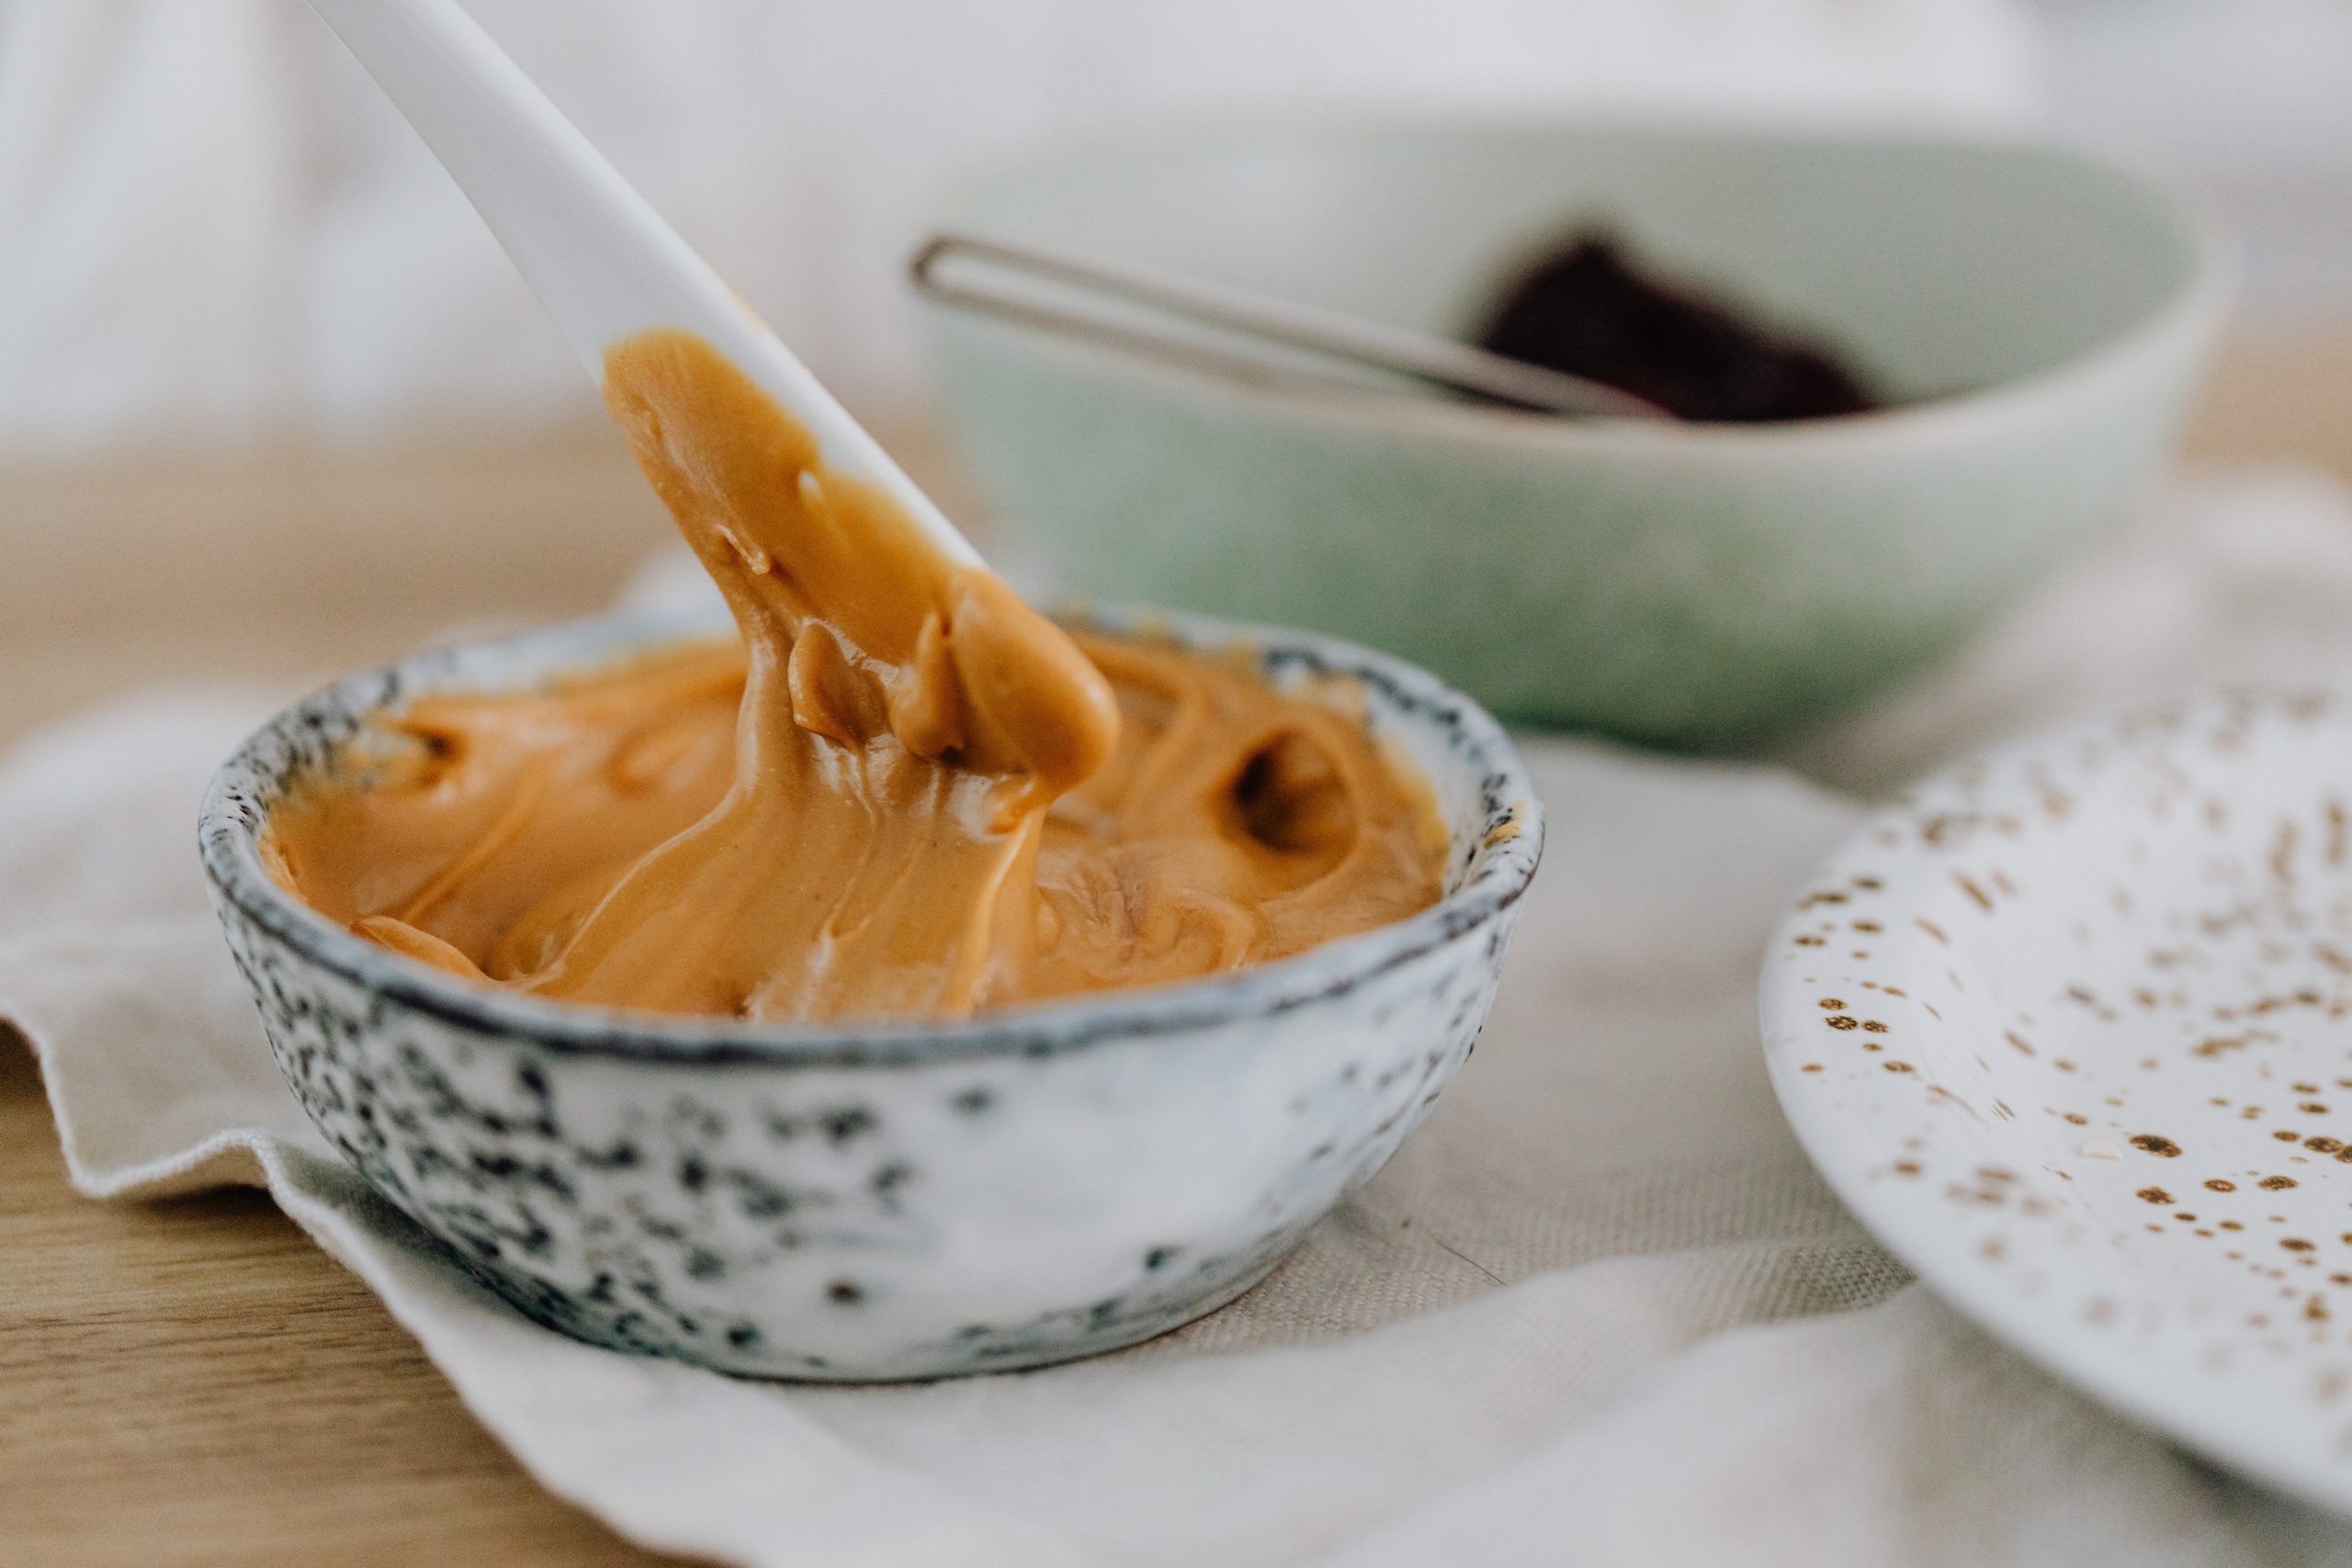 Peanut Butter - foods we thought were healthy